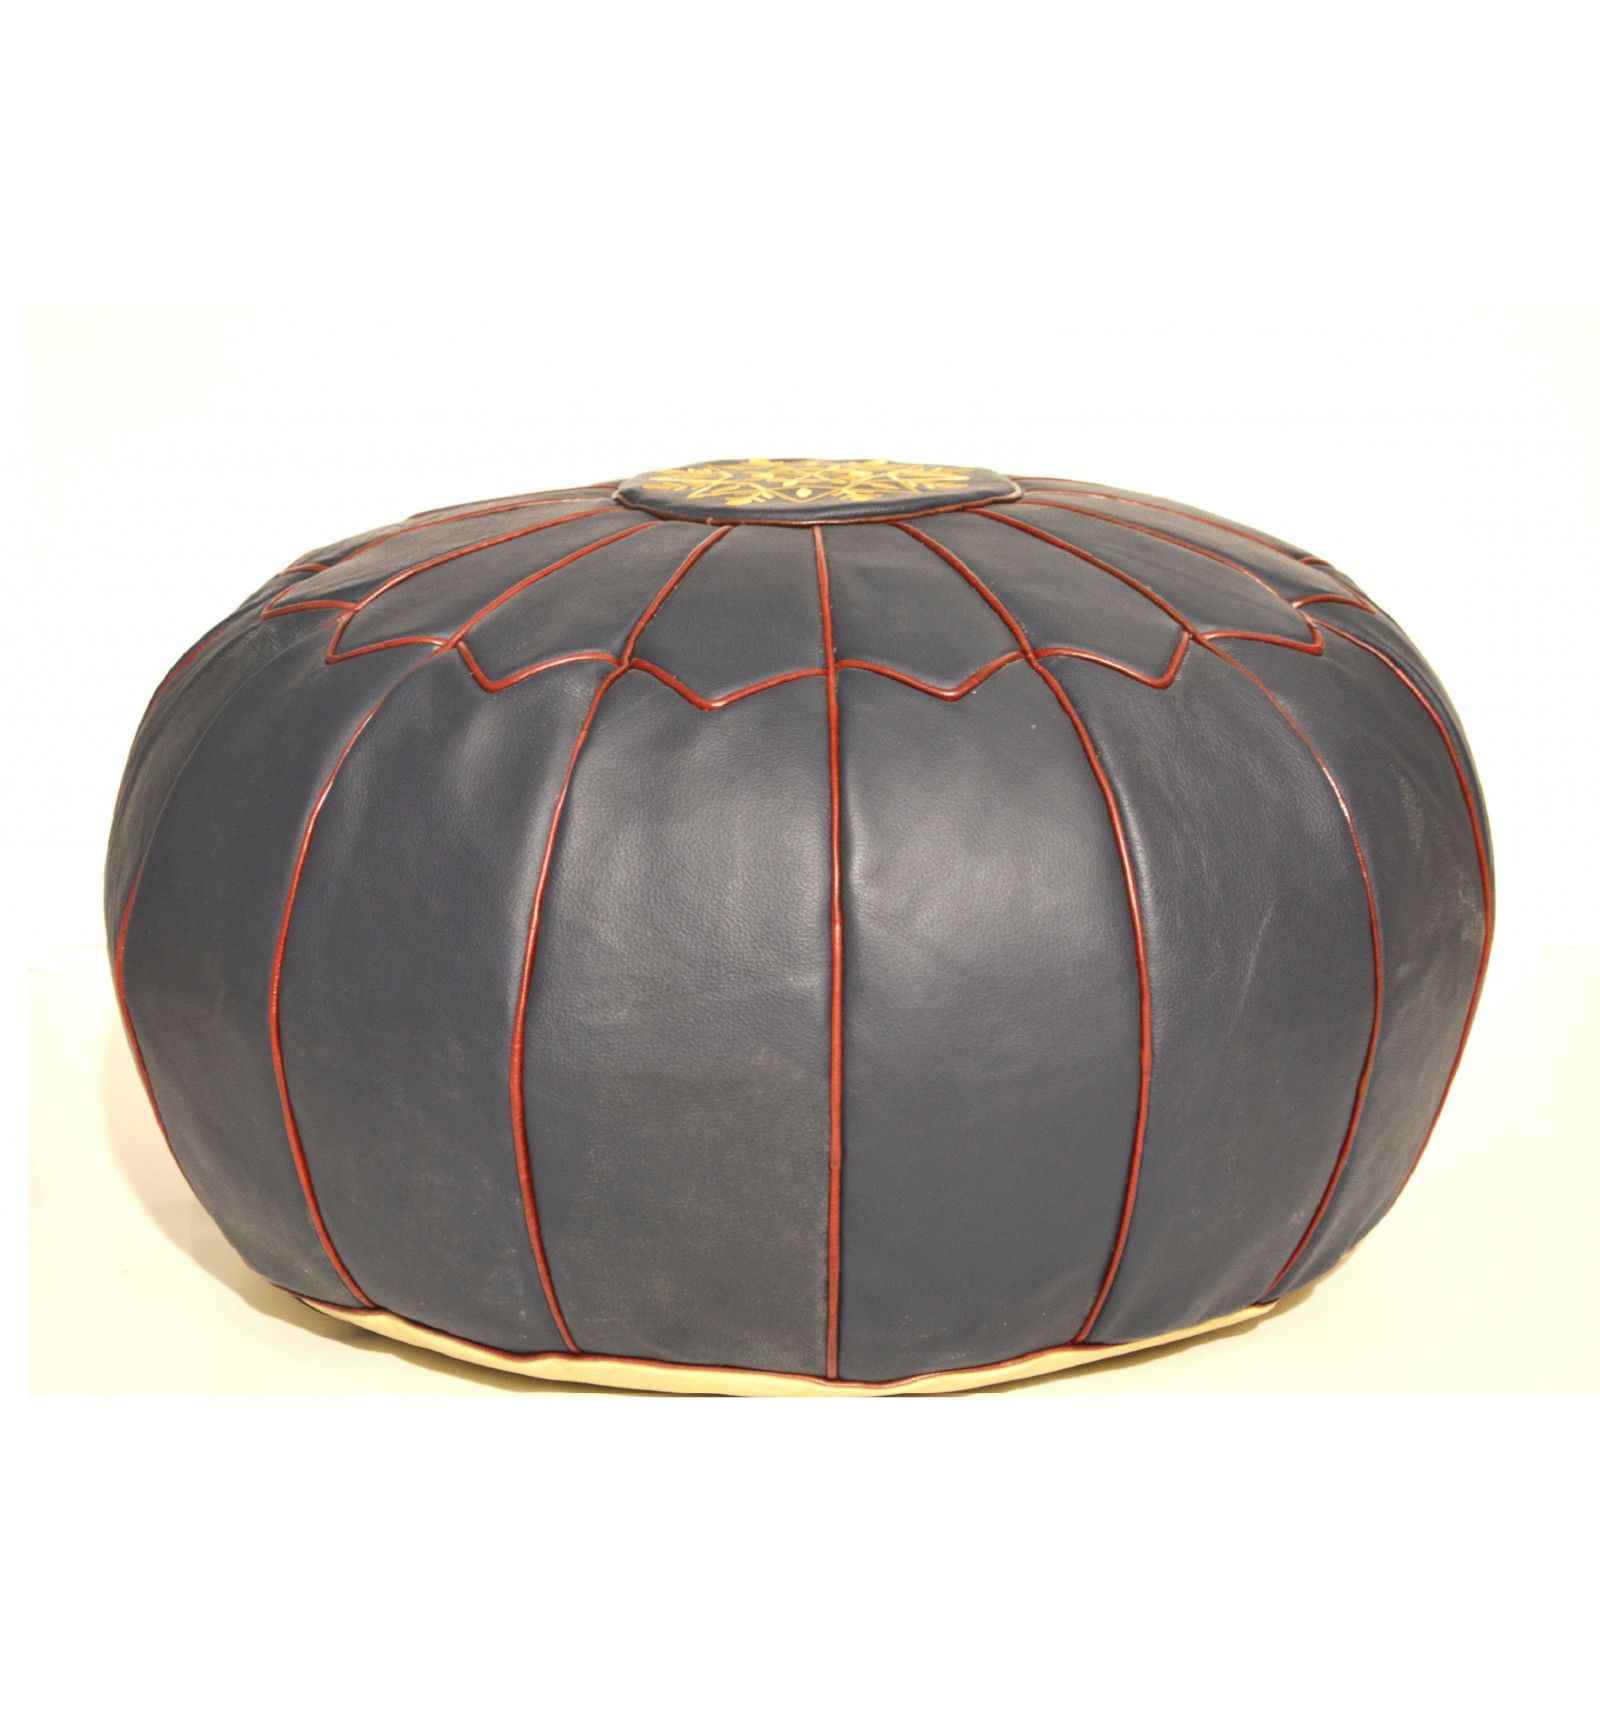 Widely Used Leather Pouf – Round Leather Ottoman Blue Regarding Weathered Gold Leather Hide Pouf Ottomans (View 4 of 10)